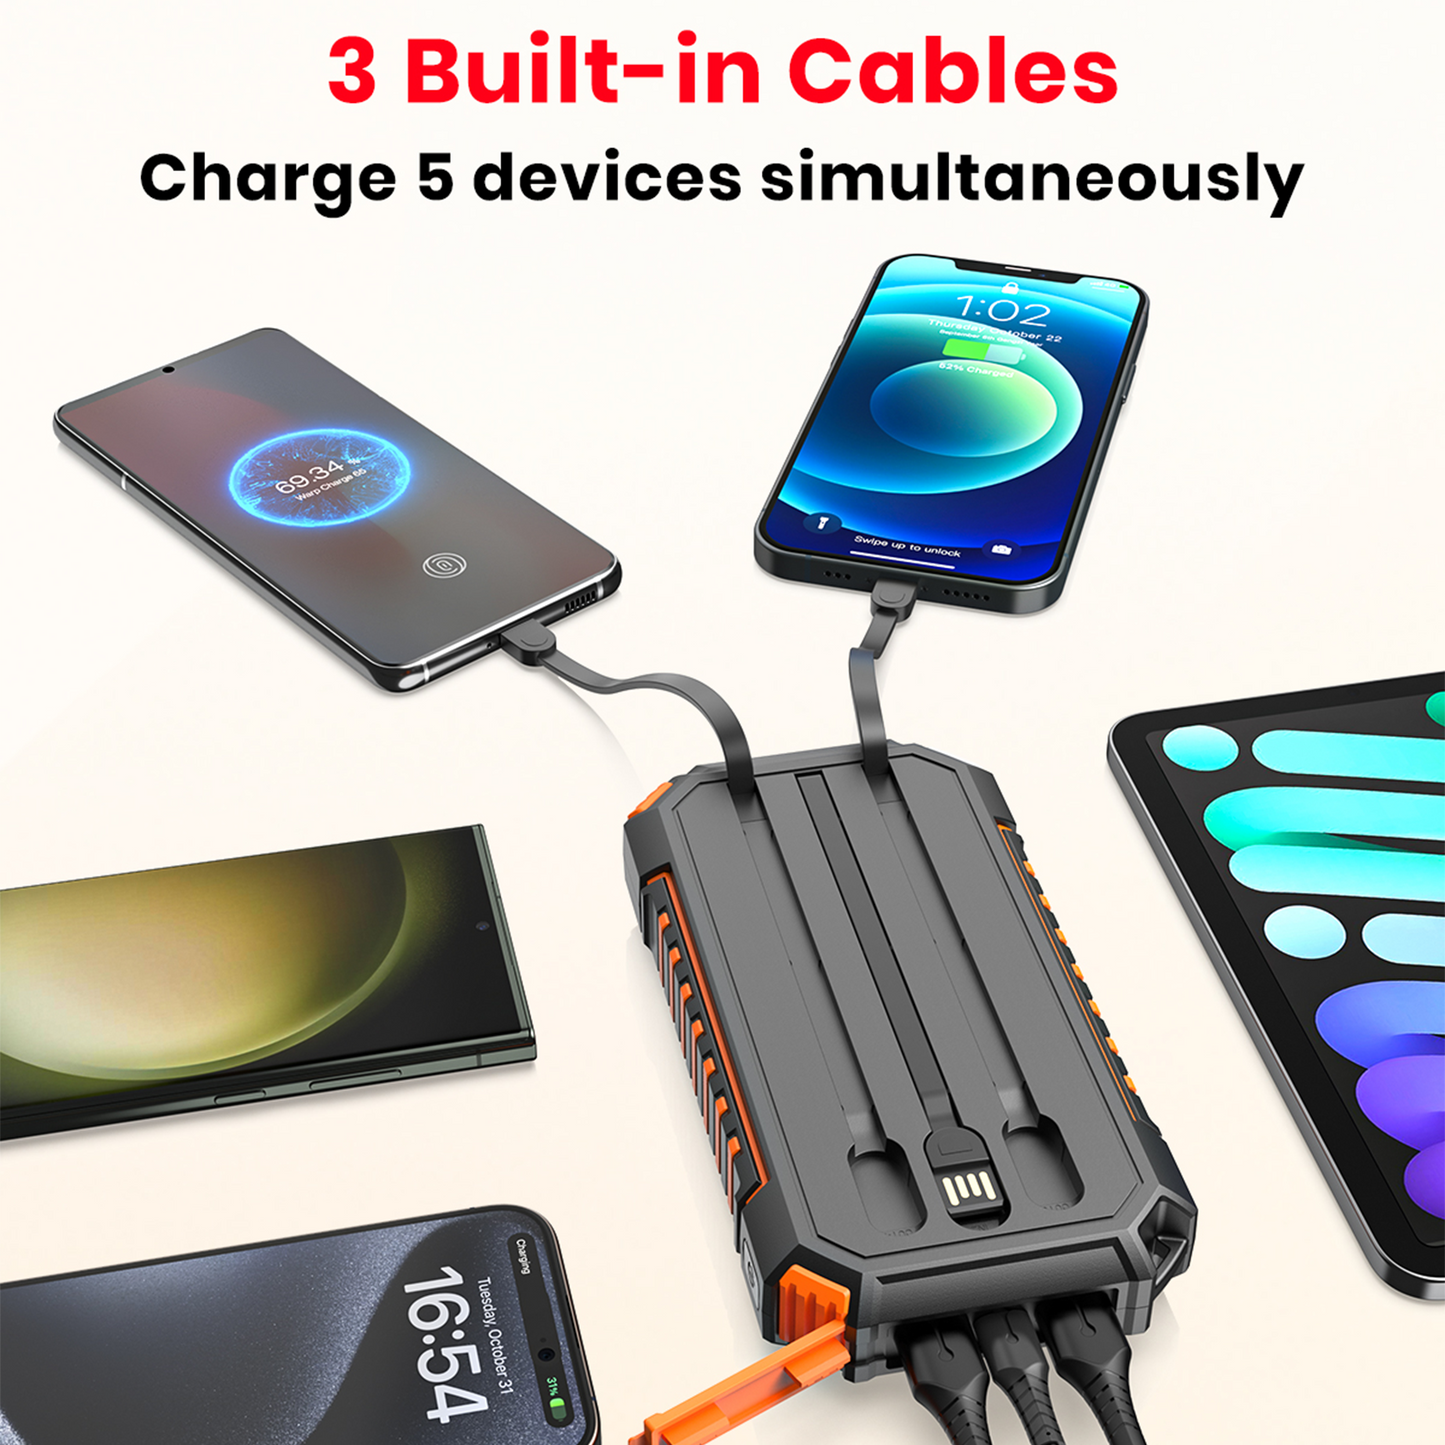 CONXWAN Solar Power Bank 27000mAh Built-in 3 Cables